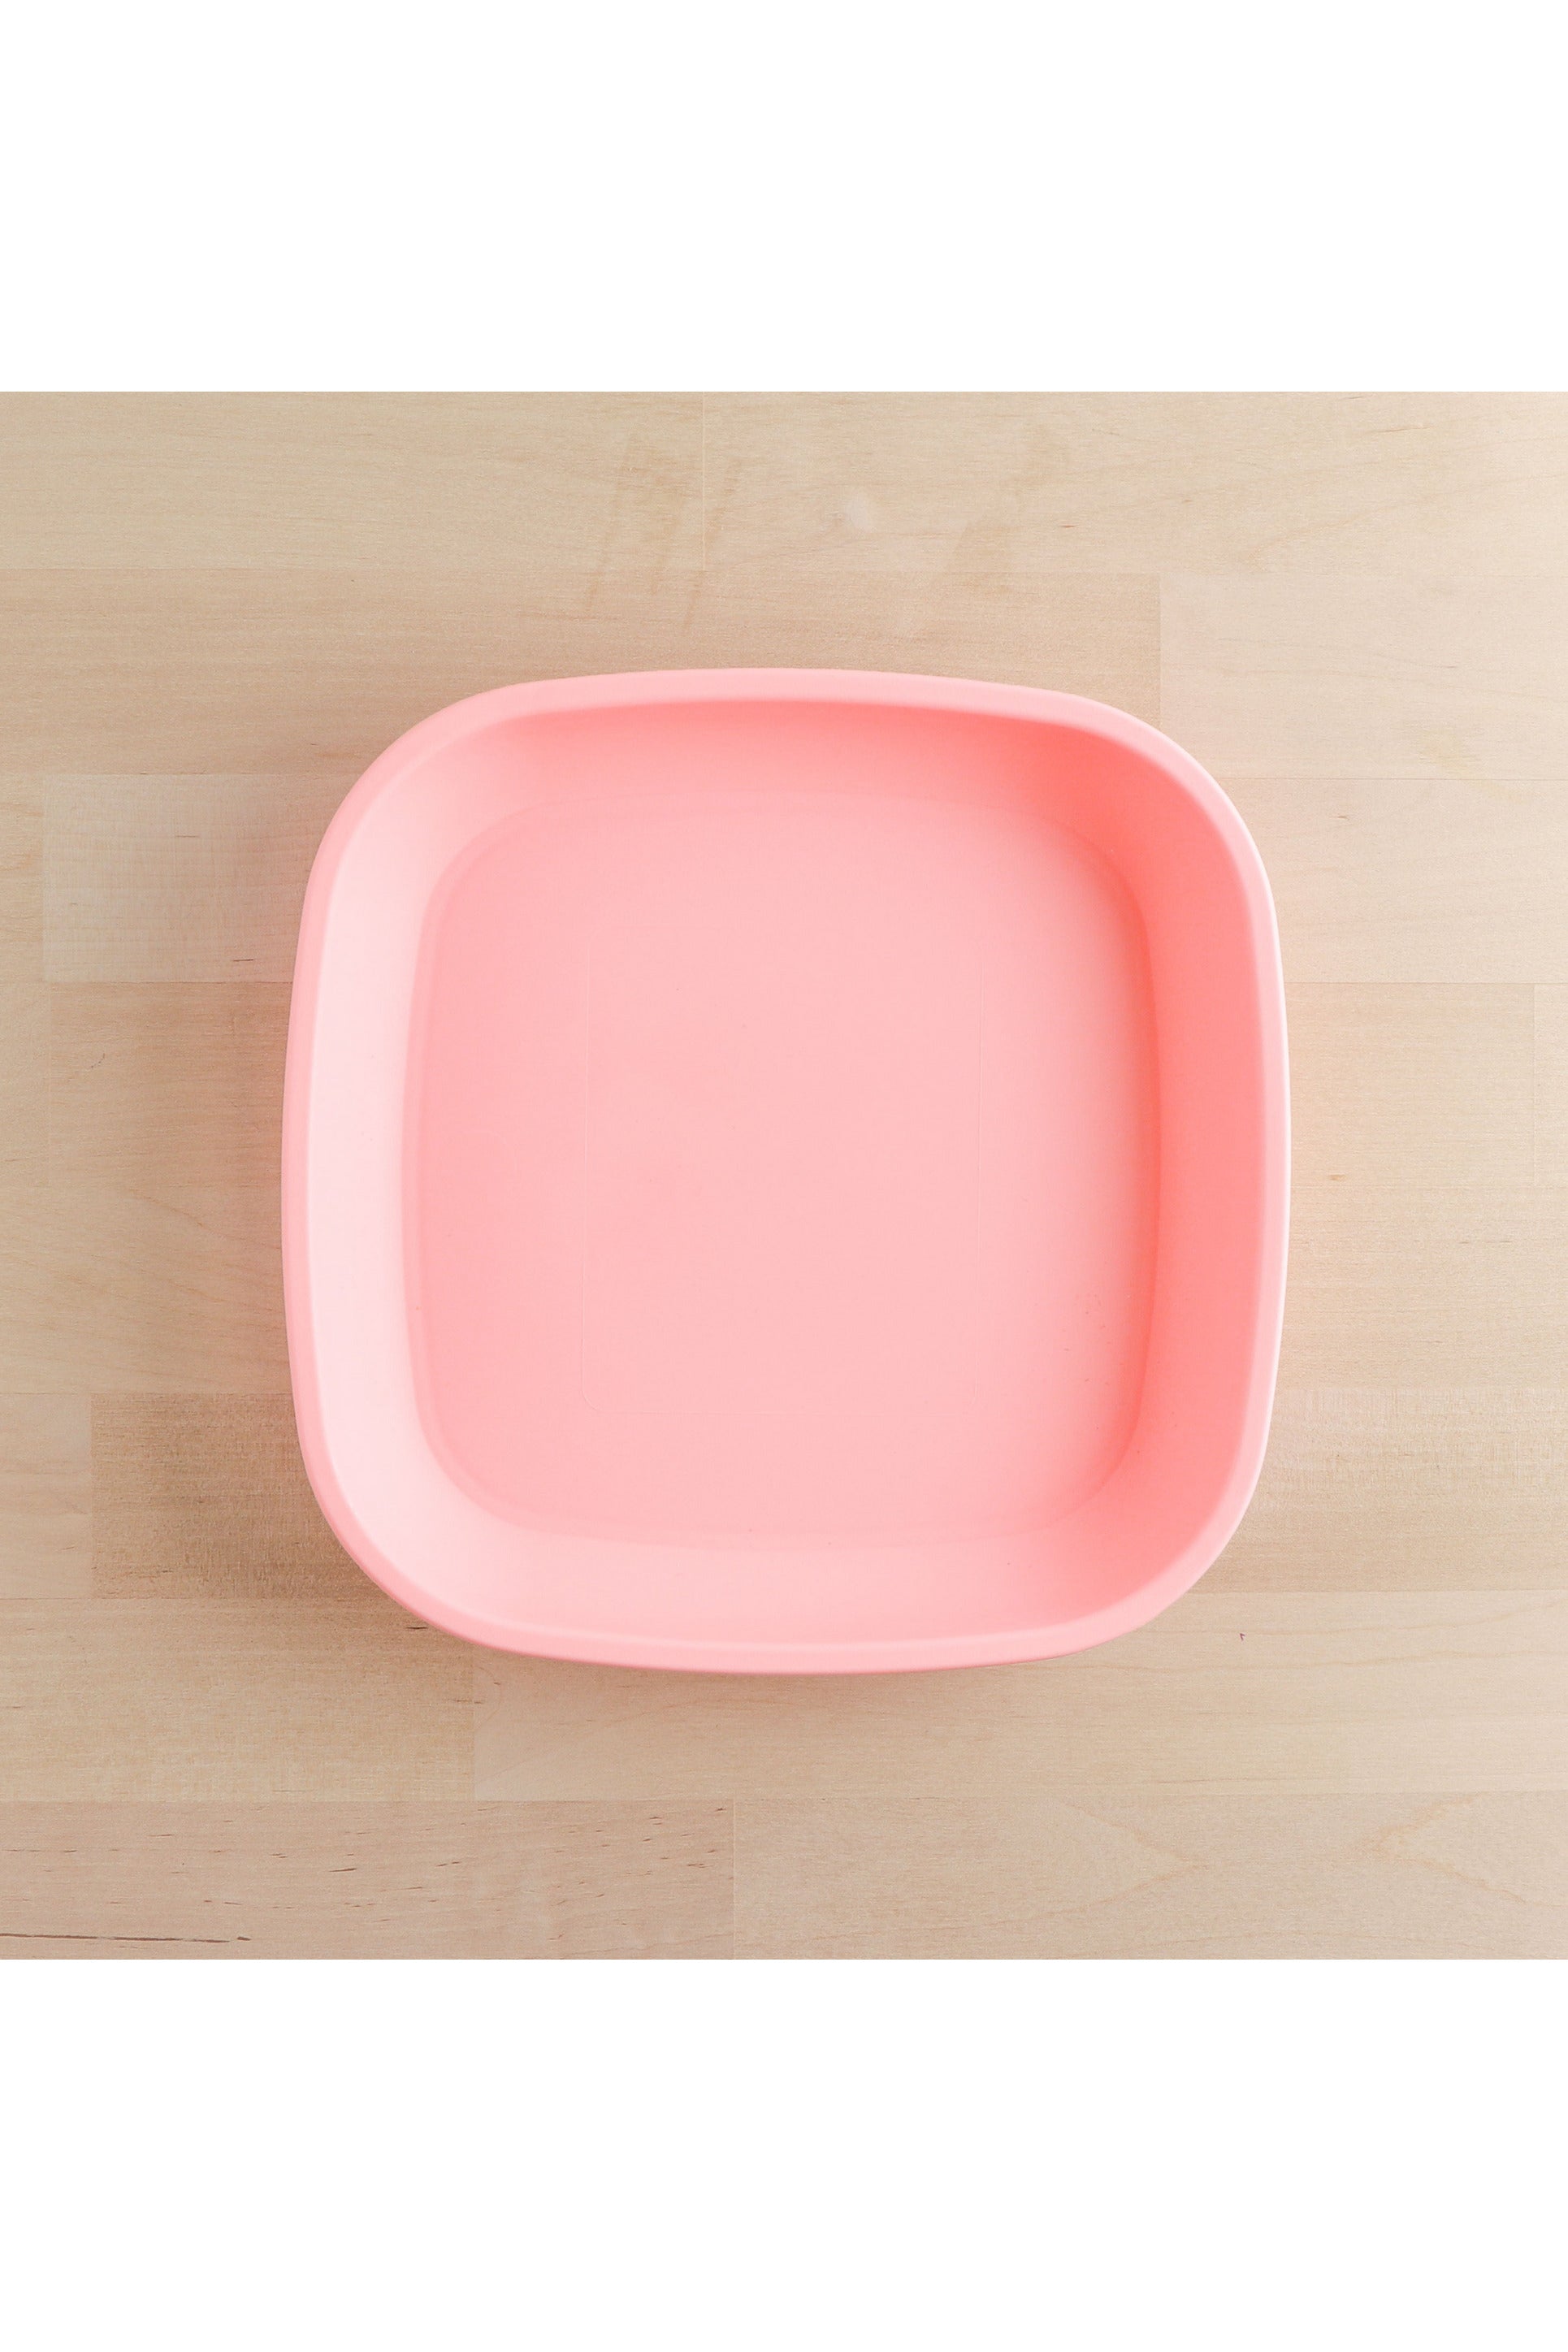 Re-Play Flat Plate - Baby Pink